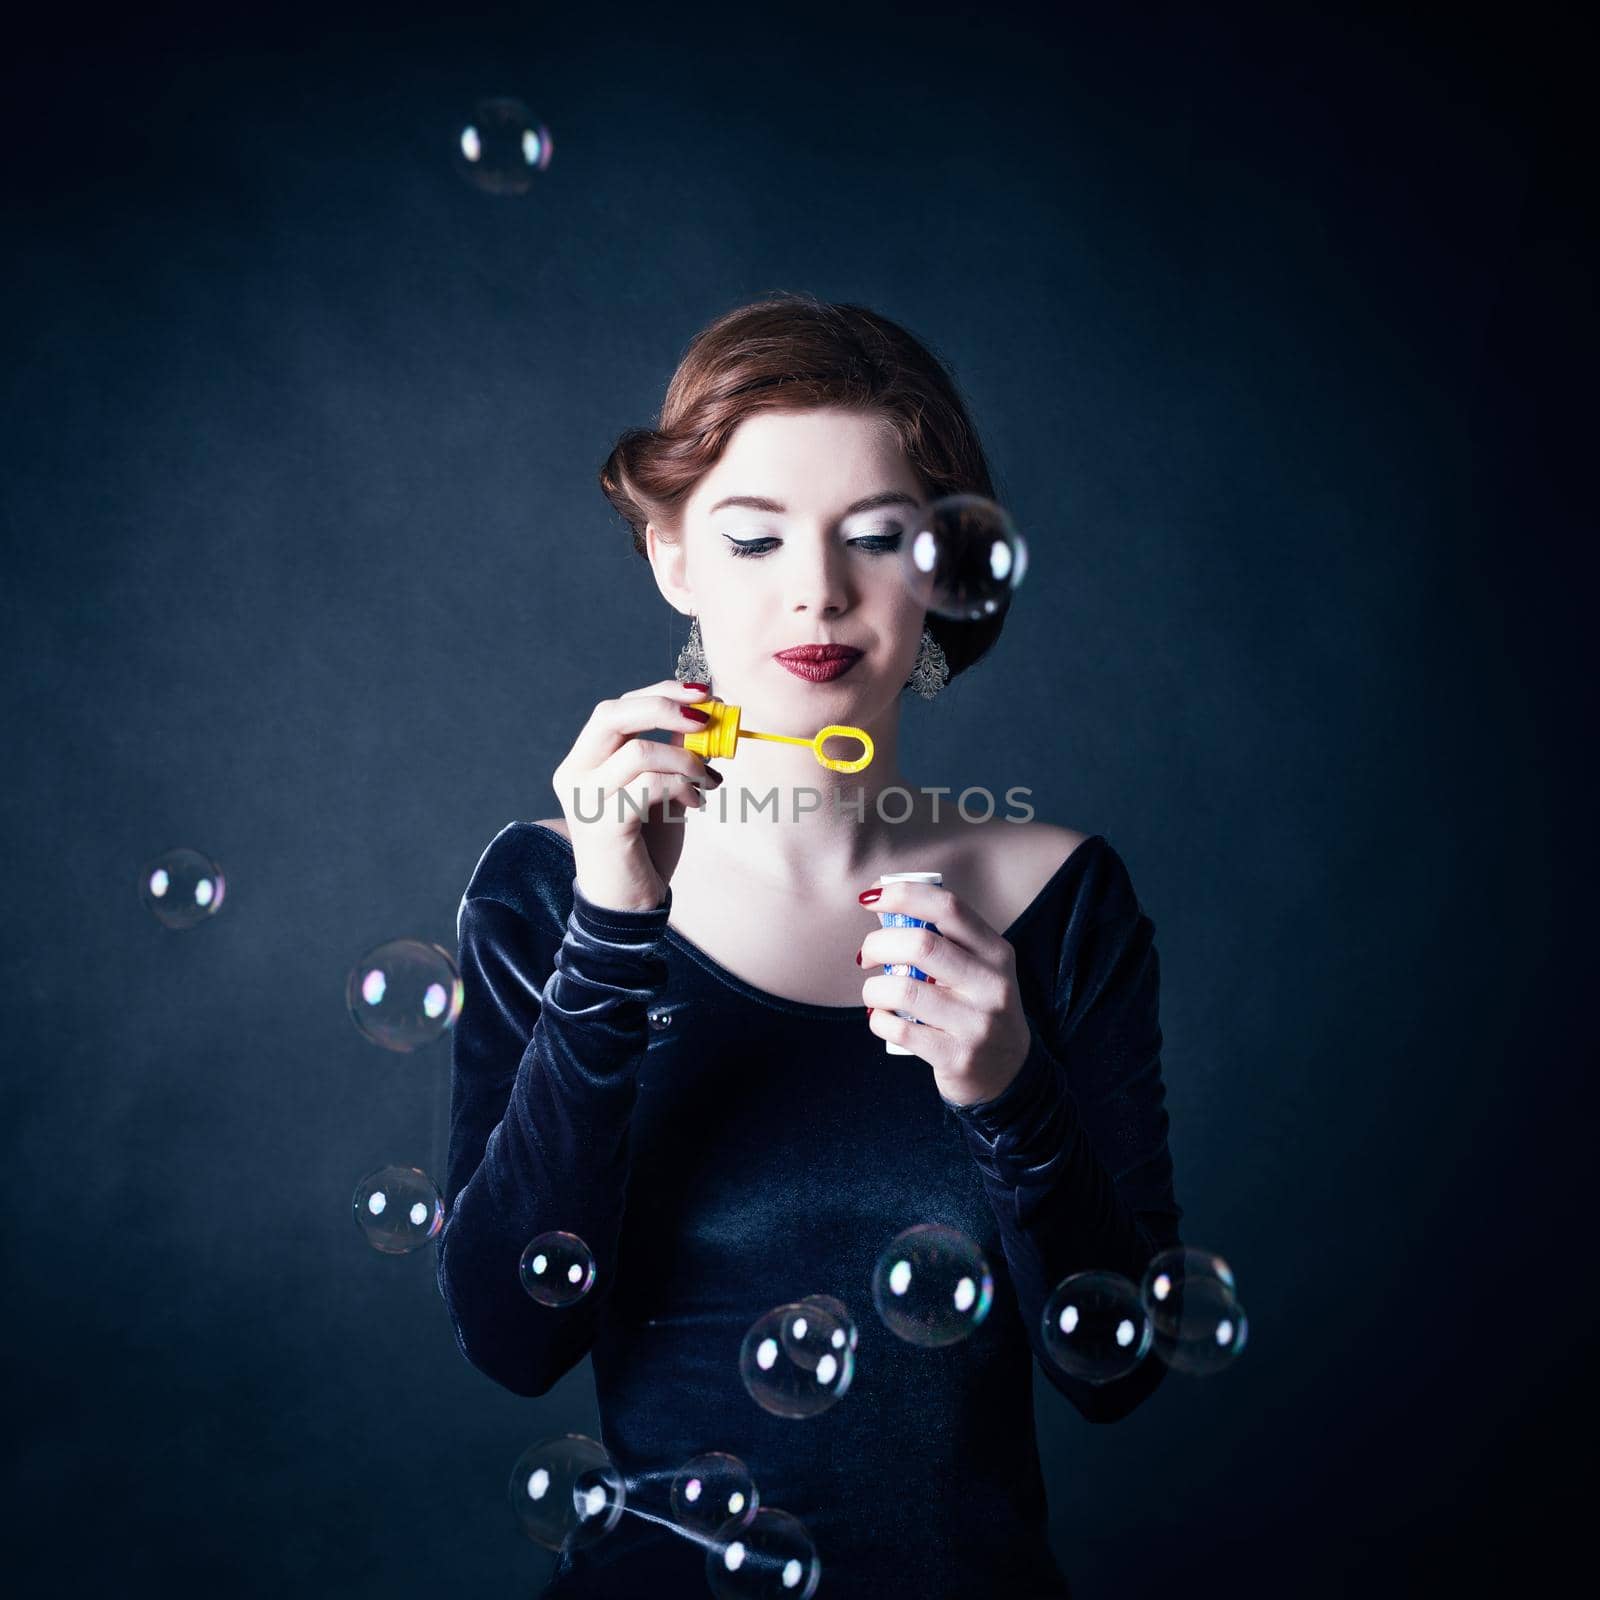 Girl making soap bubbles in front of dark background